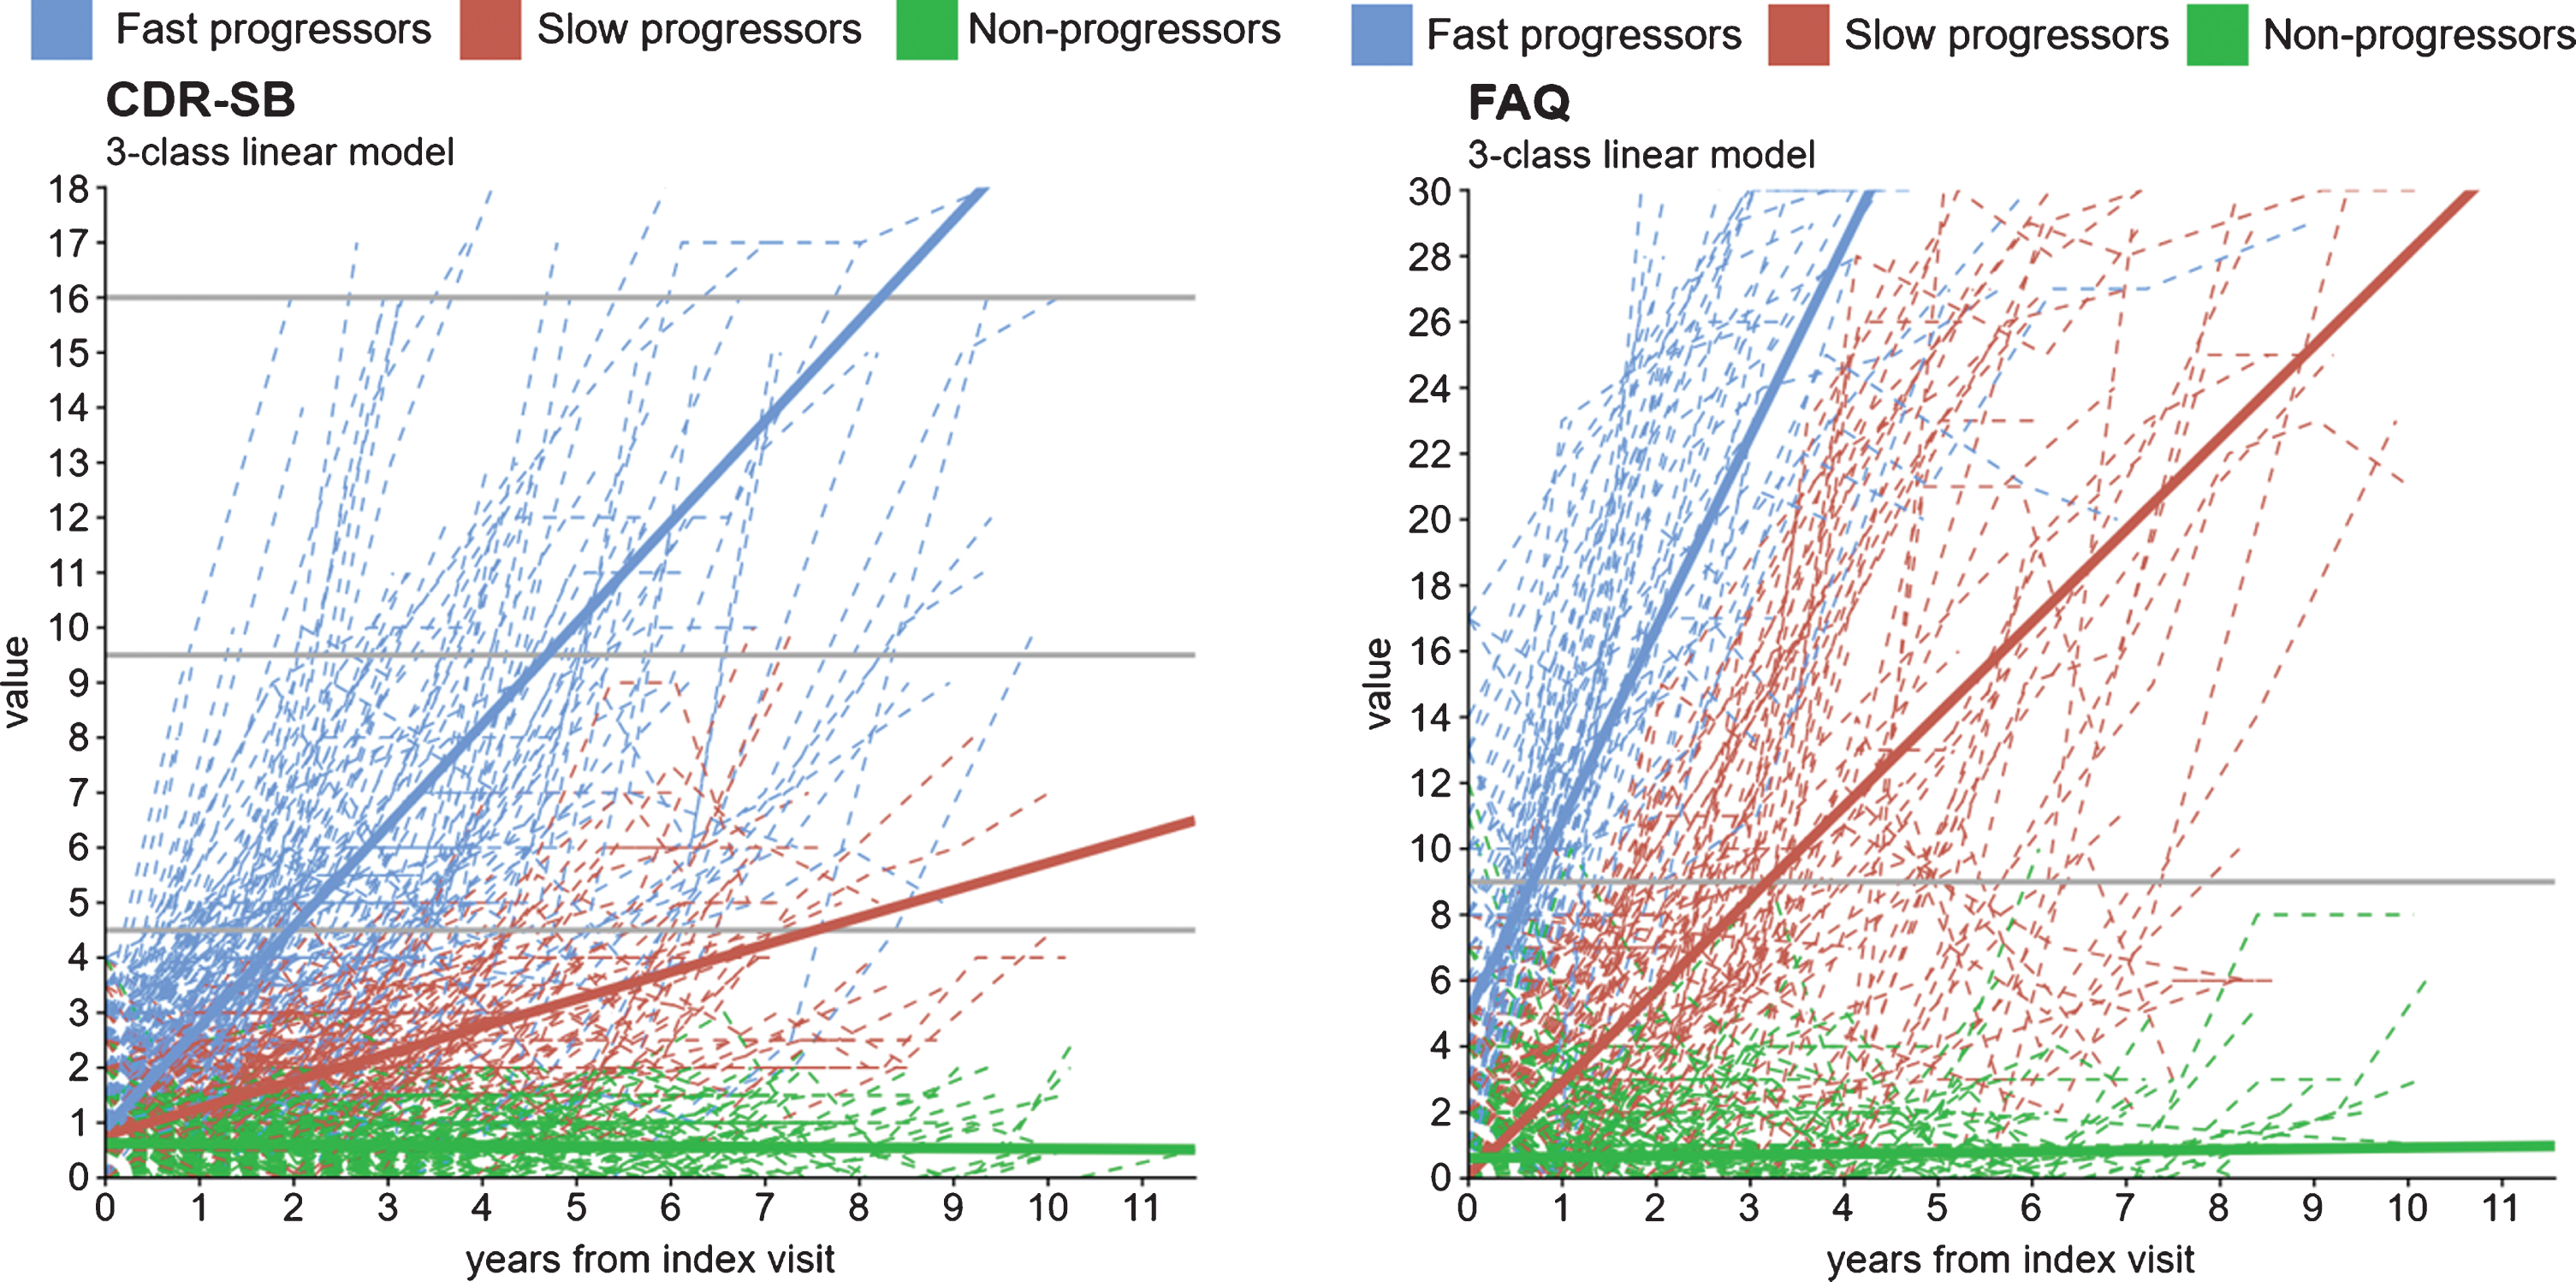 Observed individual and predicted growth trajectories for the 3-class (A) CDR-SB1 and (B) FAQ2 models3. CDR-SB, Clinical Dementia Rating Scale-Sum of Boxes; FAQ, Functional Activities Questionnaire. 1 CDR-SB score ranges from 0 to 18 in 0.5 increments. Higher values indicate worse cognition: 0 = Normal; 0.5 –4.0 = Questionable cognitive impairment; 4.5 –9.0 = Mild dementia; 9.5 –15.5 = Moderate dementia; 16.0 –18.0 = Severe dementia. 2 FAQ score ranges from 0 to 30. Higher values indicate worse function. A cutoff of 9 (dependent on 3 or more activities) is recommended to indicate impaired function and possible cognitive impairment. 3 These models were run using the latent class mixed models (lcmm) package in R. Trajectories are based on lcmm’s predictY function.